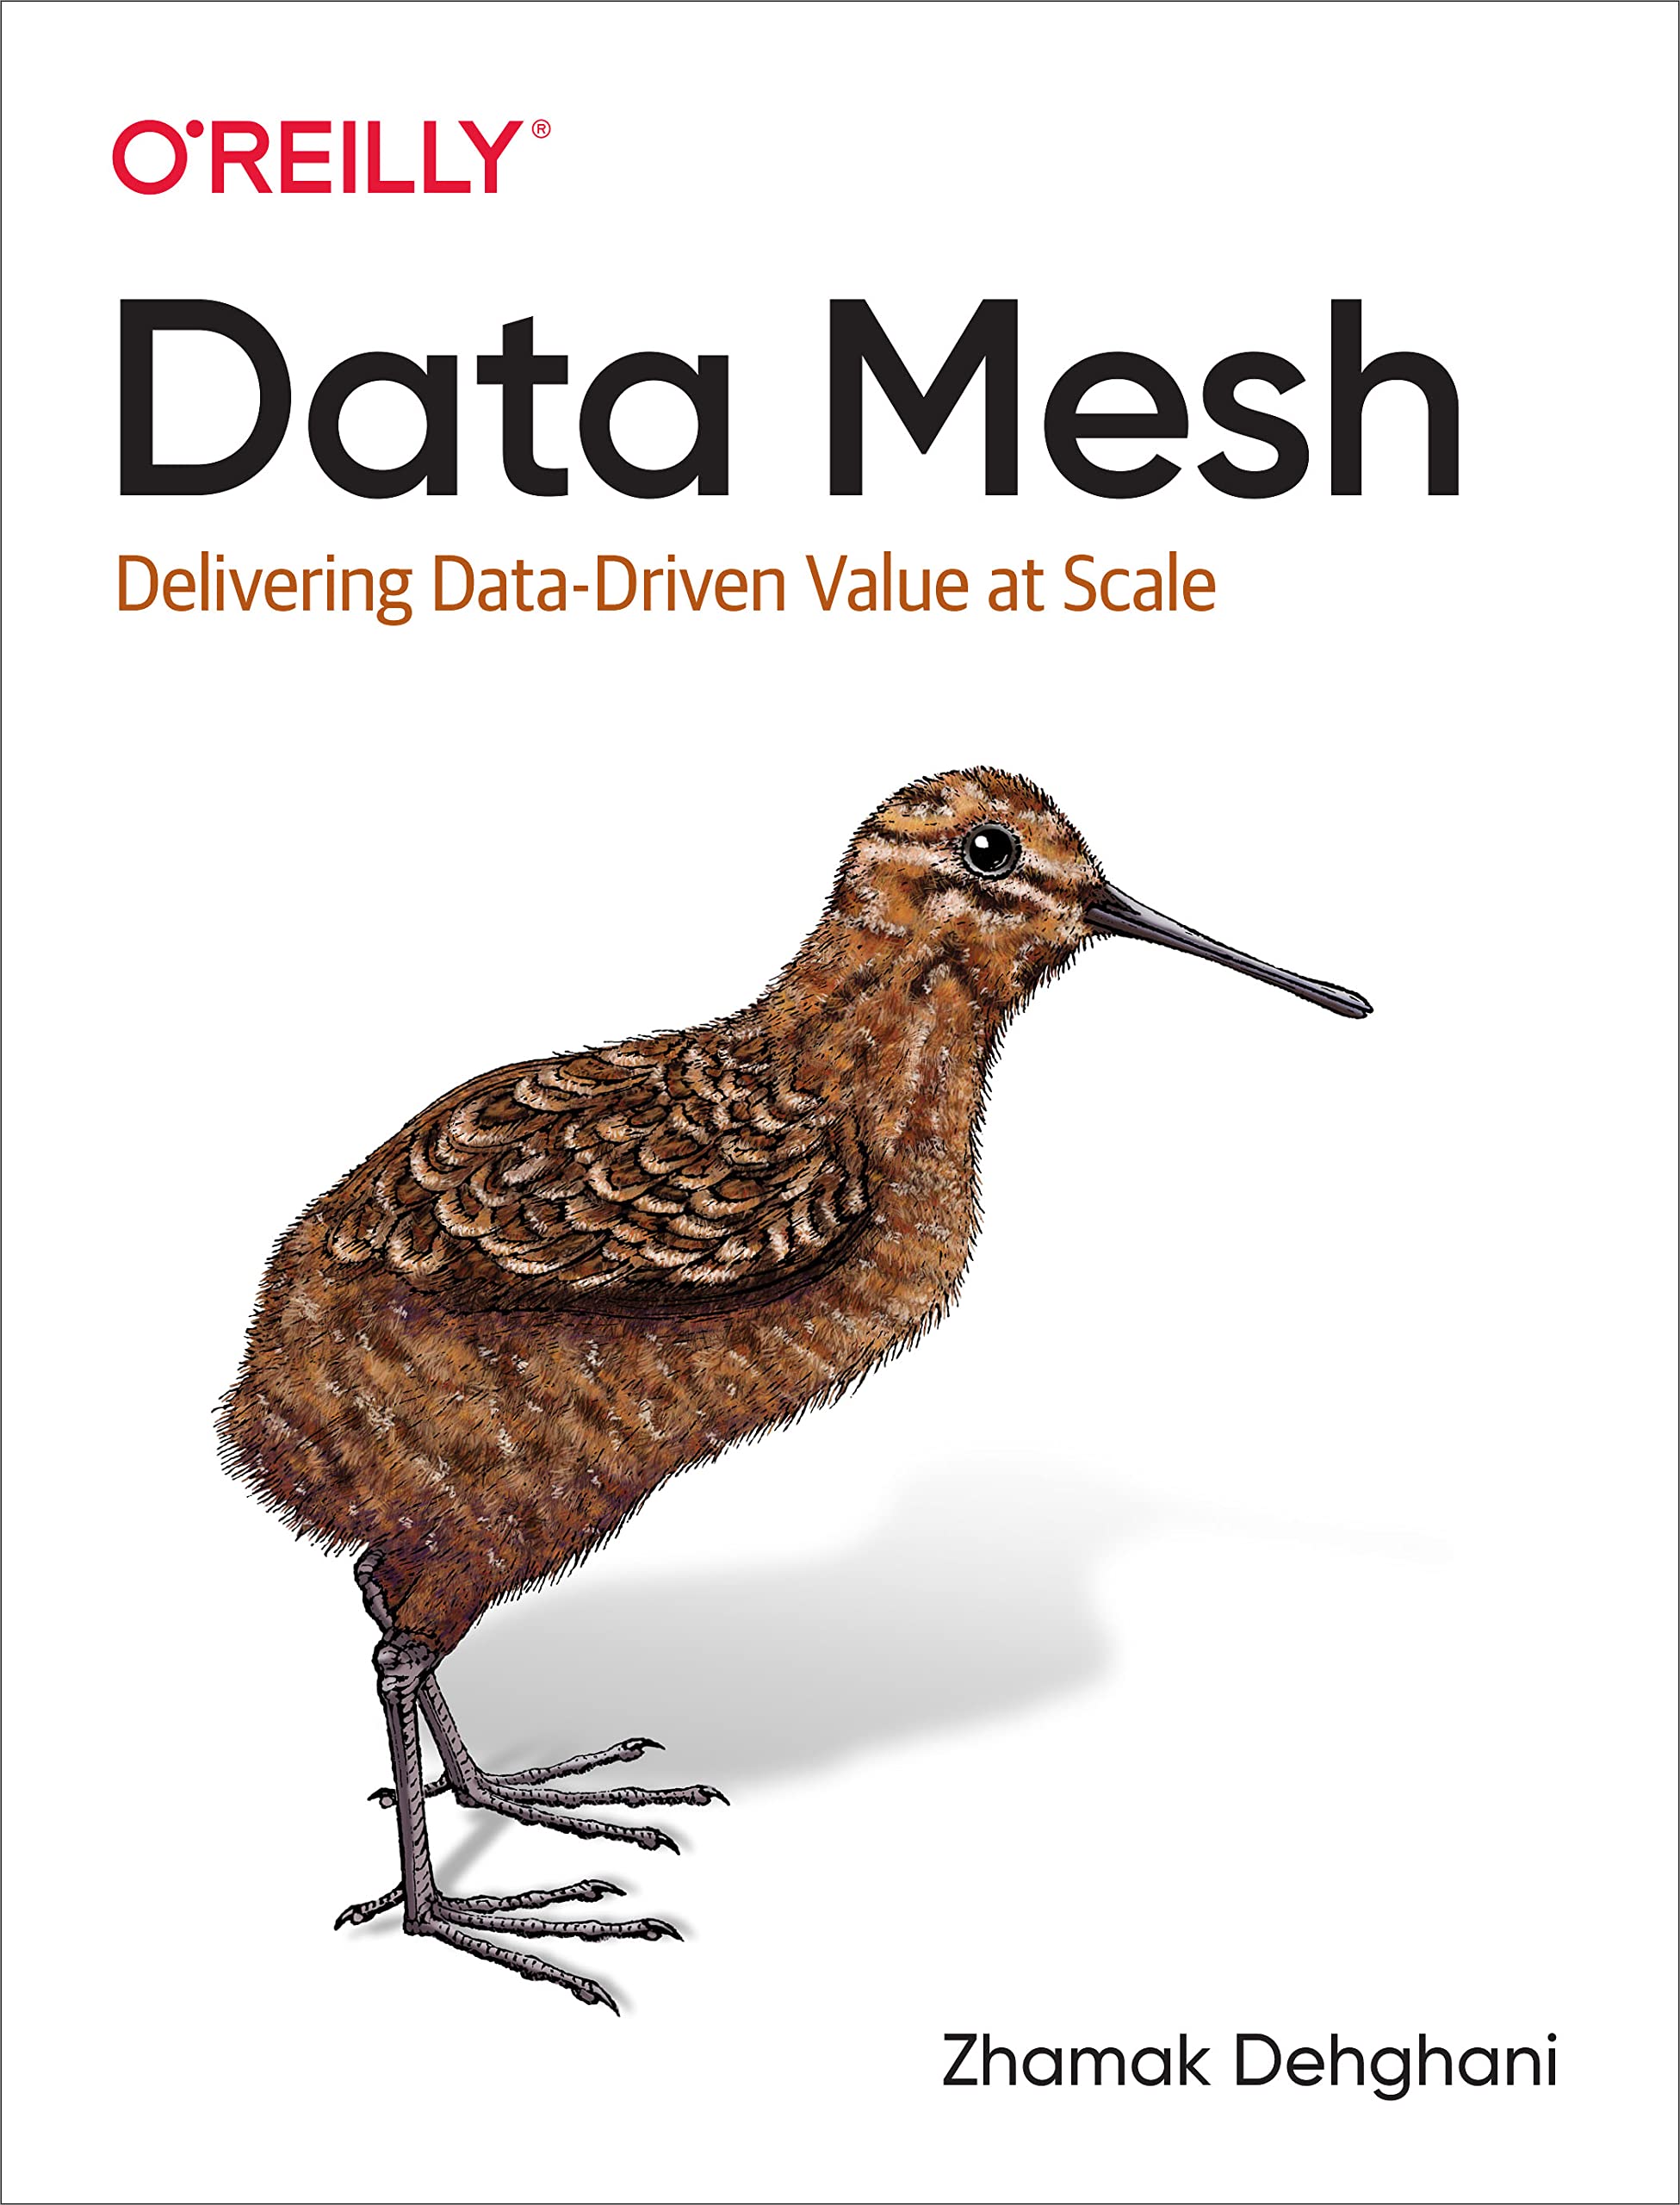 Data Mesh Principles and Logical Architecture